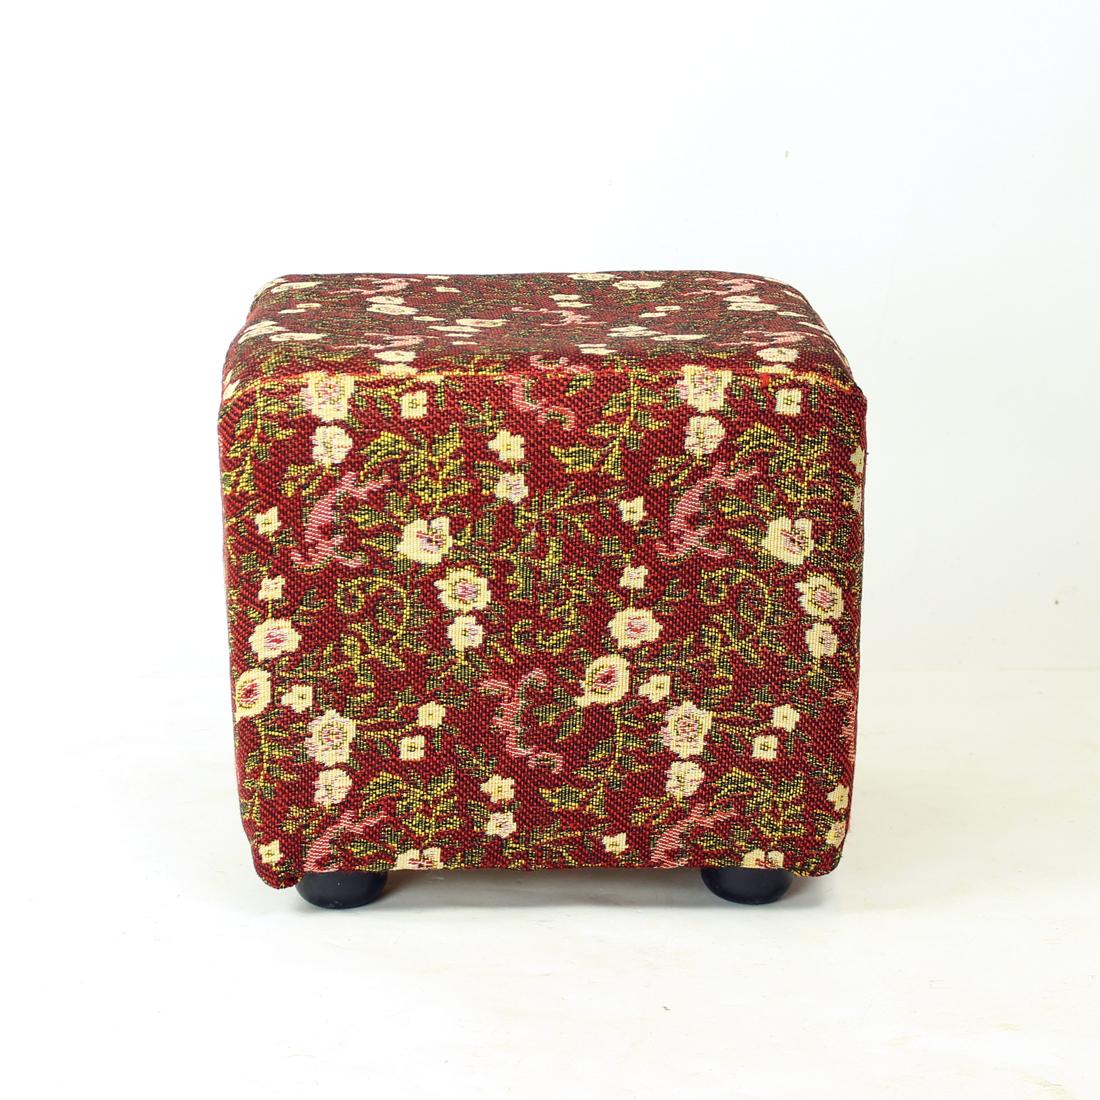 This is a really cute item! Original vintage foot stool from the mid-century era of design. produced in Czechoslovakia in 1960s. The stool is in a cube design, fully upholstered in original fabric. The stool is light, yet strong enough to work as a